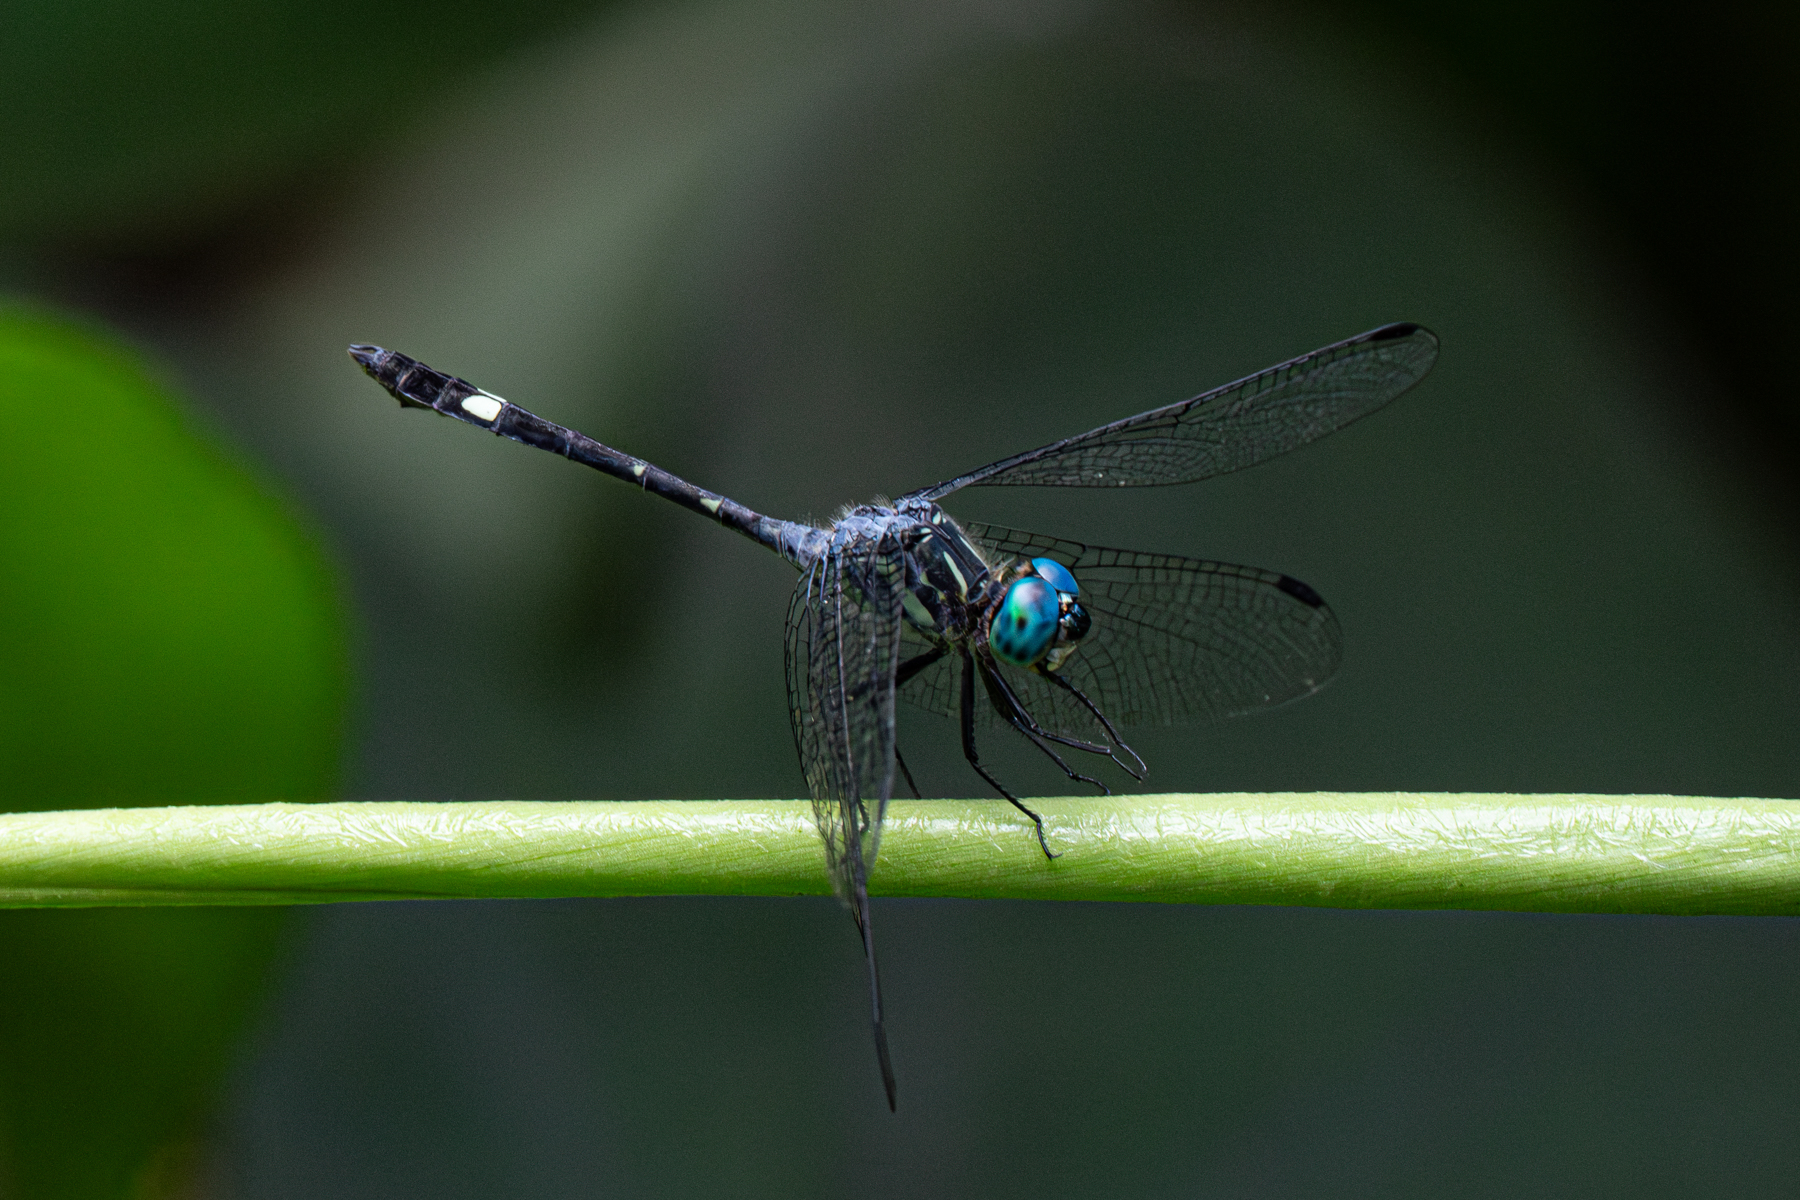 Knob-tailed Dragonfly in a rainforest pool (image by Inger Vandyke)